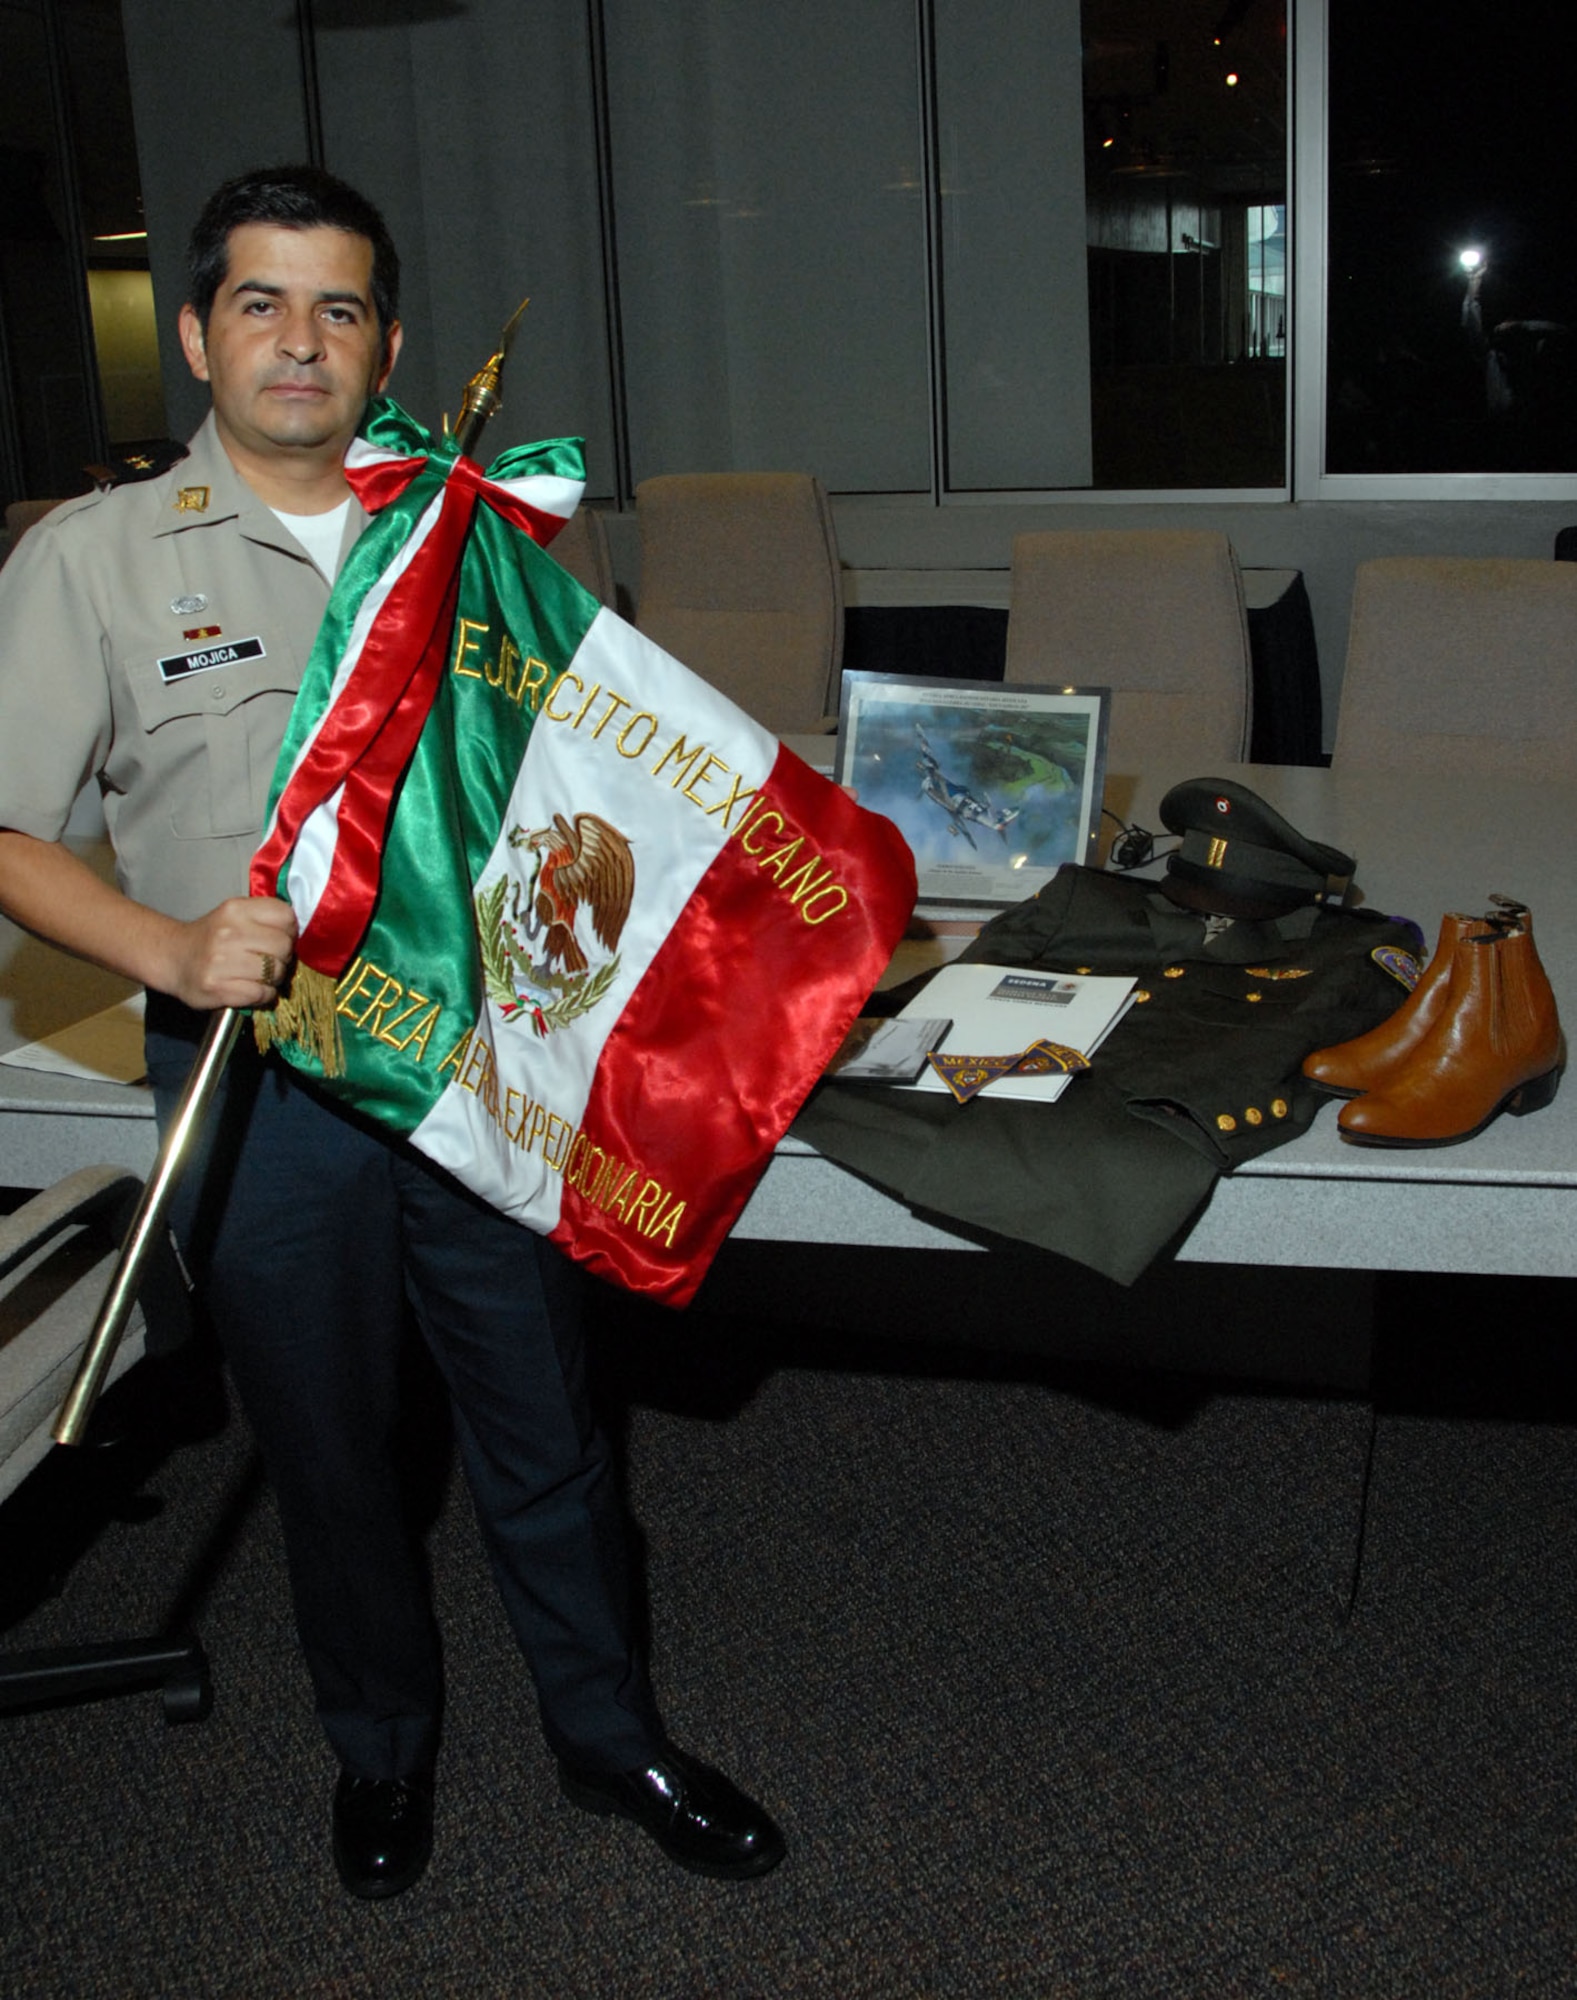 DAYTON, Ohio - Mexican air force Lt. Col. Daniel Mojica stands in front of items while holding the unit colors for the Mexican Expeditionary Air Force (“Fuerza Aérea Expedicionaria Mexicana” or FAEM). These items were donated during a ceremony at the National Museum of the U.S. Air Force. (U.S. Air Force photo)